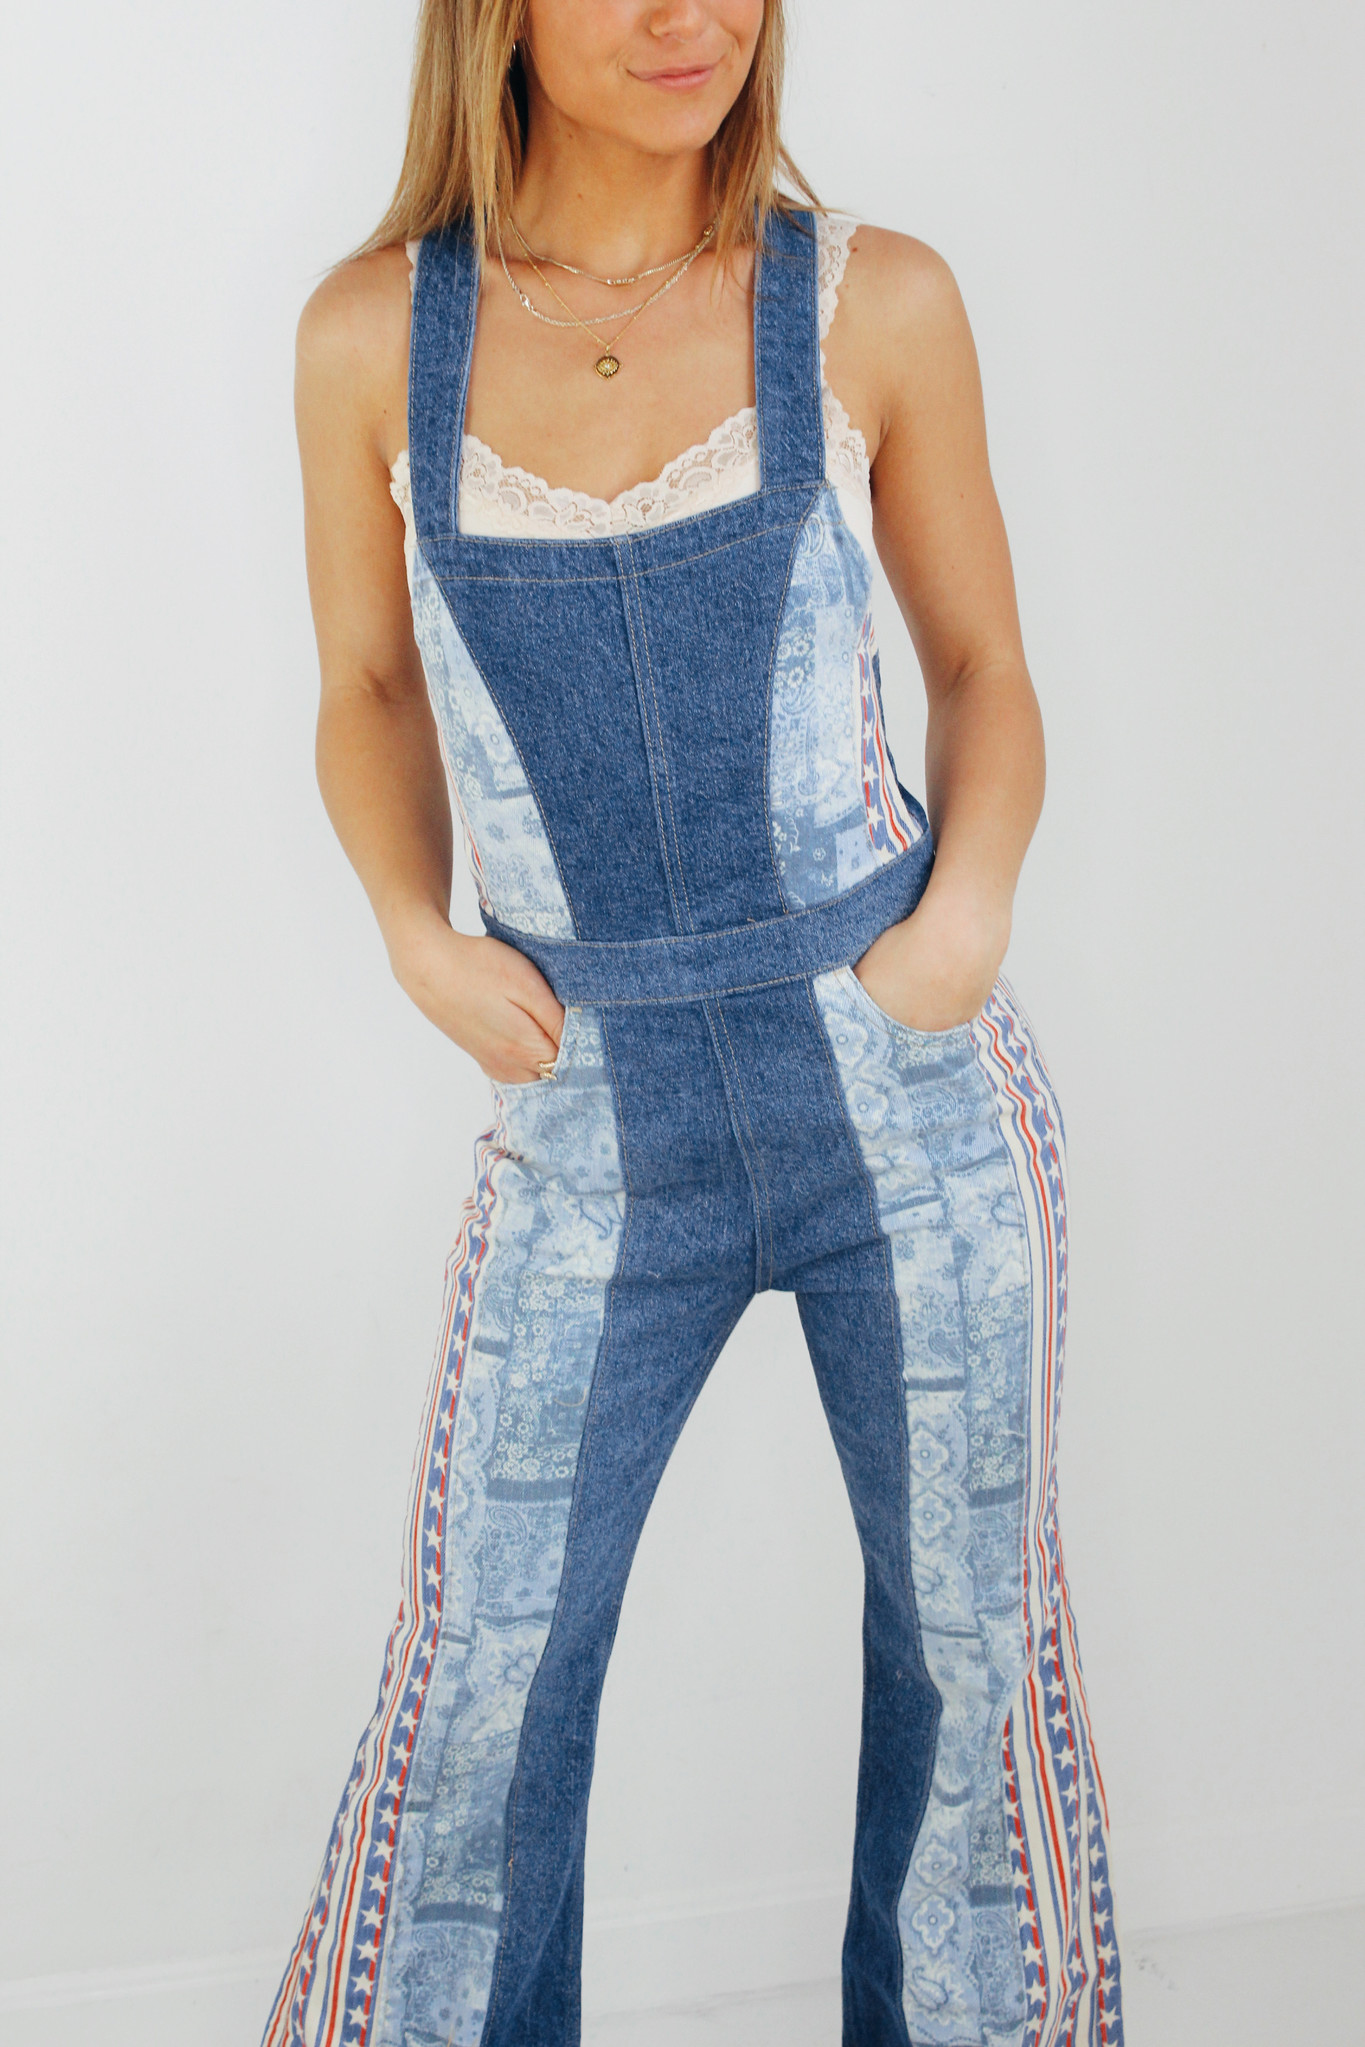 FP Movement Jumpsuits & Rompers for Women